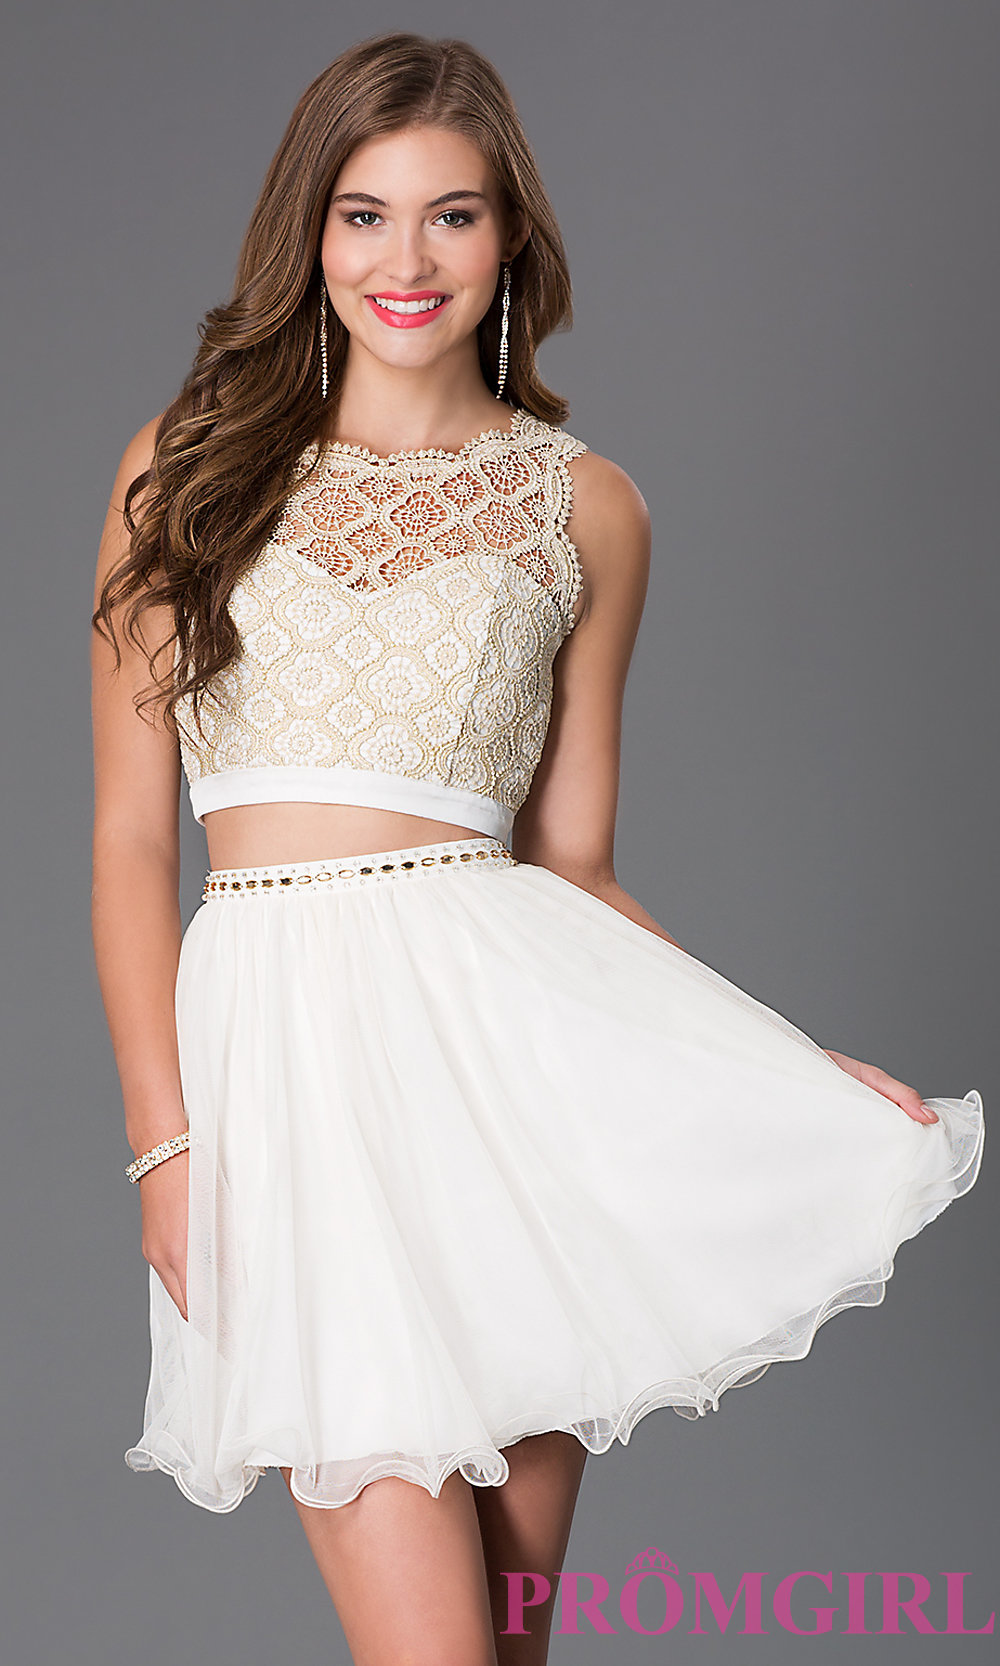 Two Piece White And Gold Prom Dress : A Wonderful Start